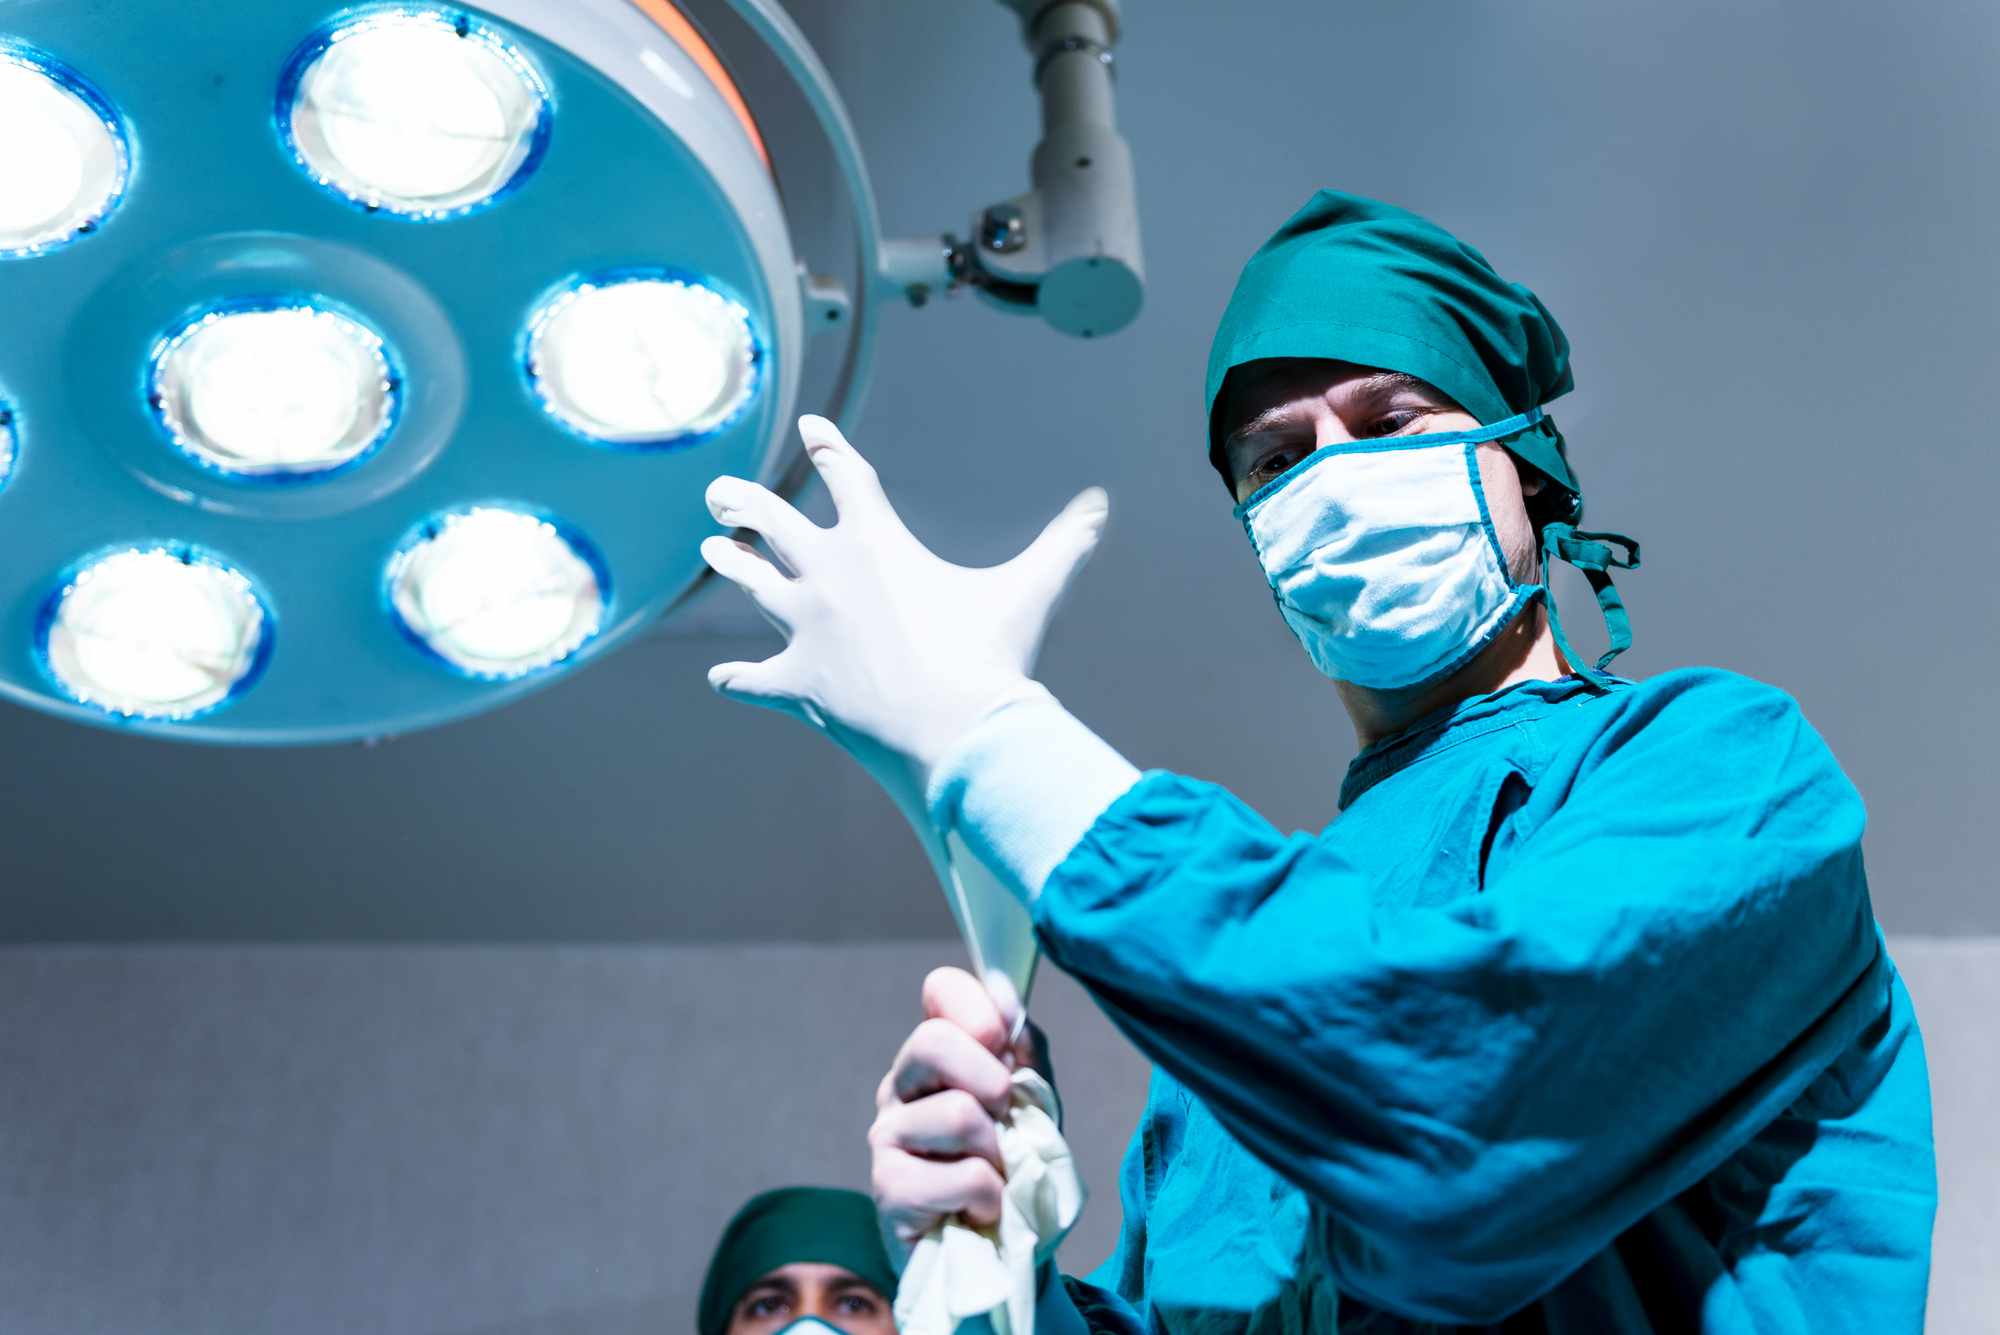 photograph of surgeon in operating room putting on gloves